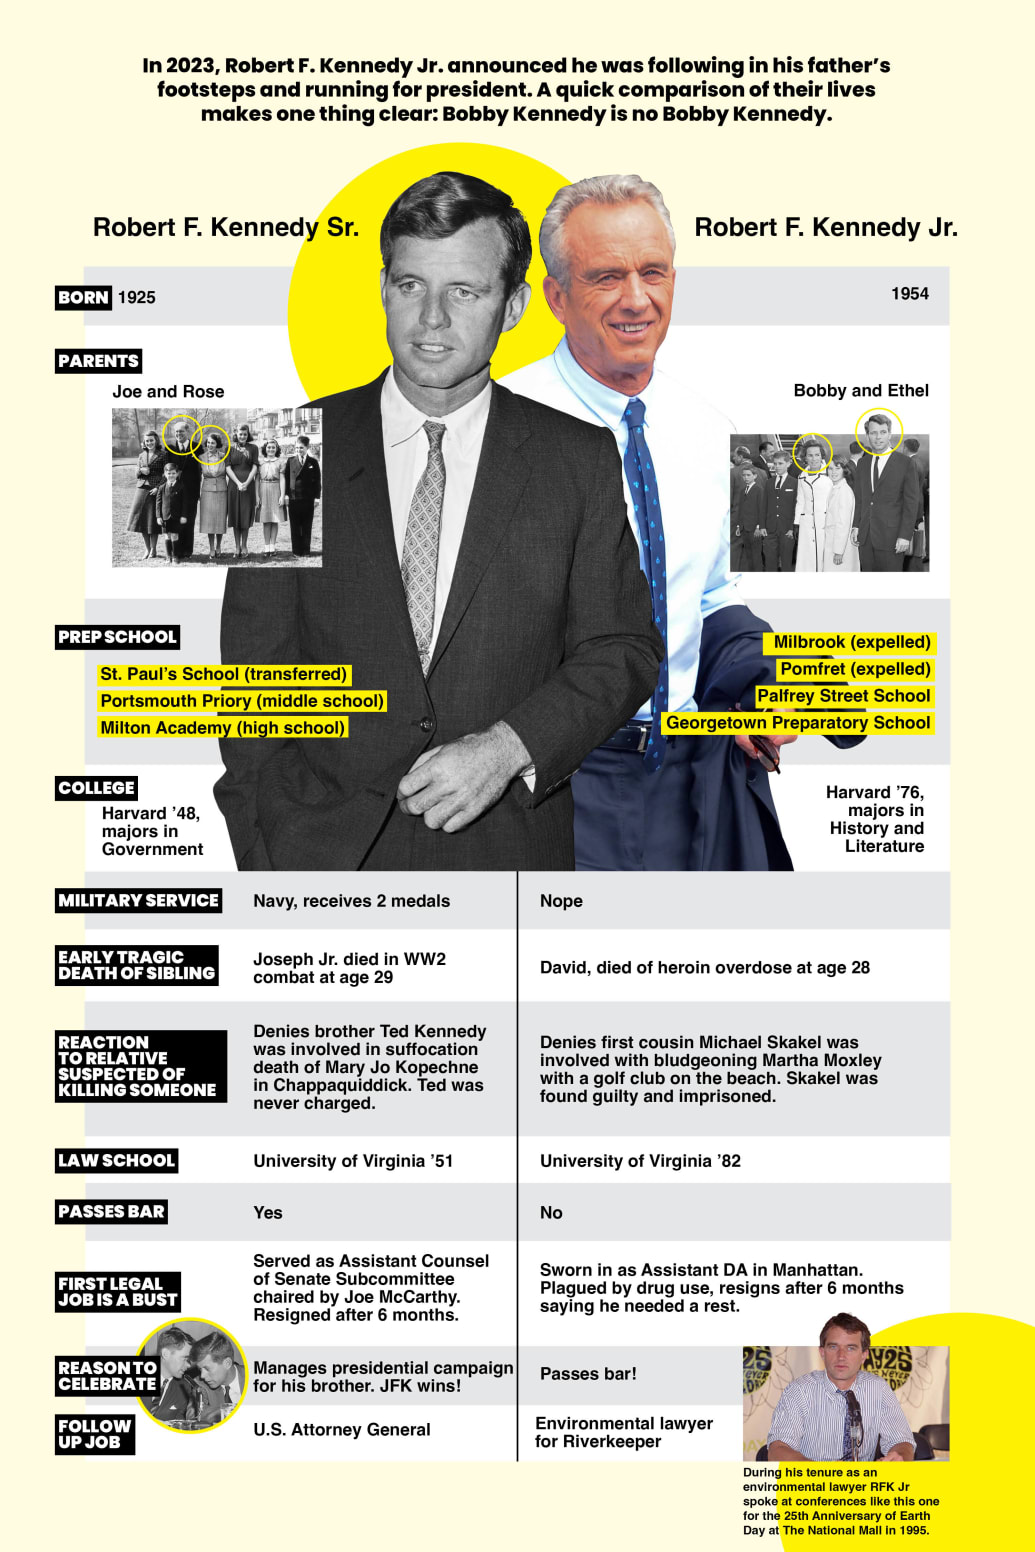 An infographic of Robert F Kennedy and RFK Jr.